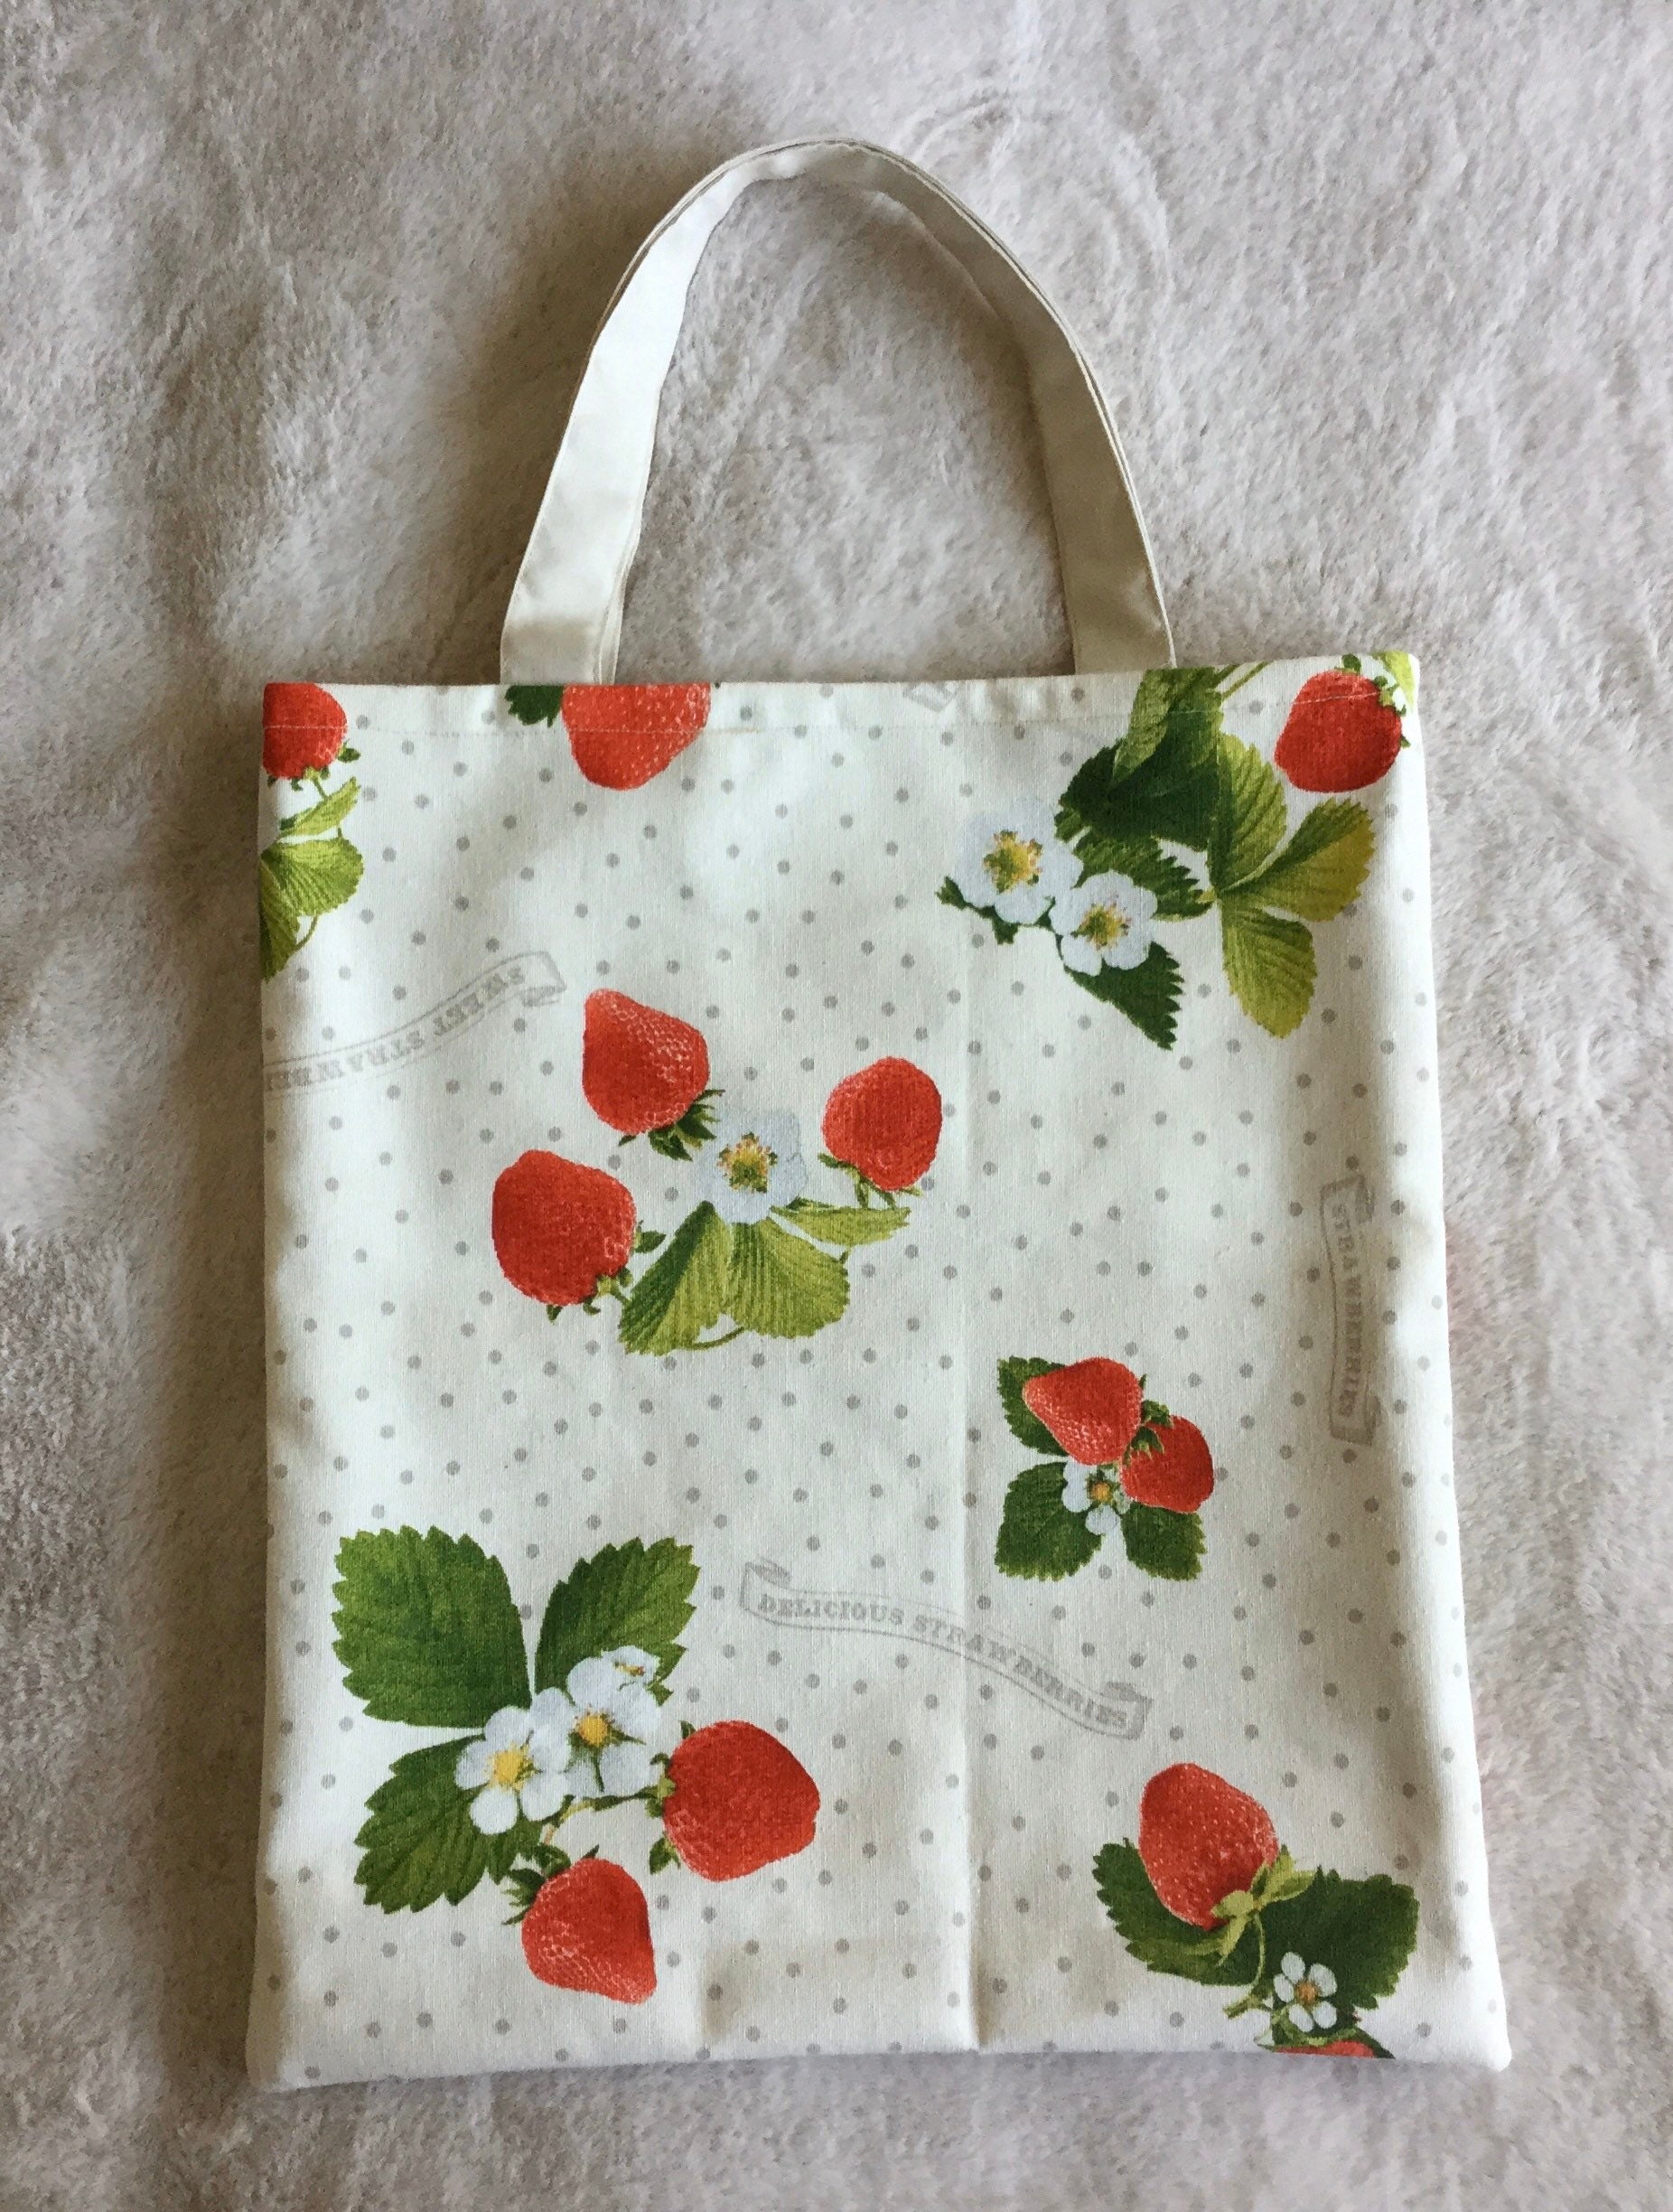 Handmade strawberry pattern cotton tote bag with lining and | Etsy